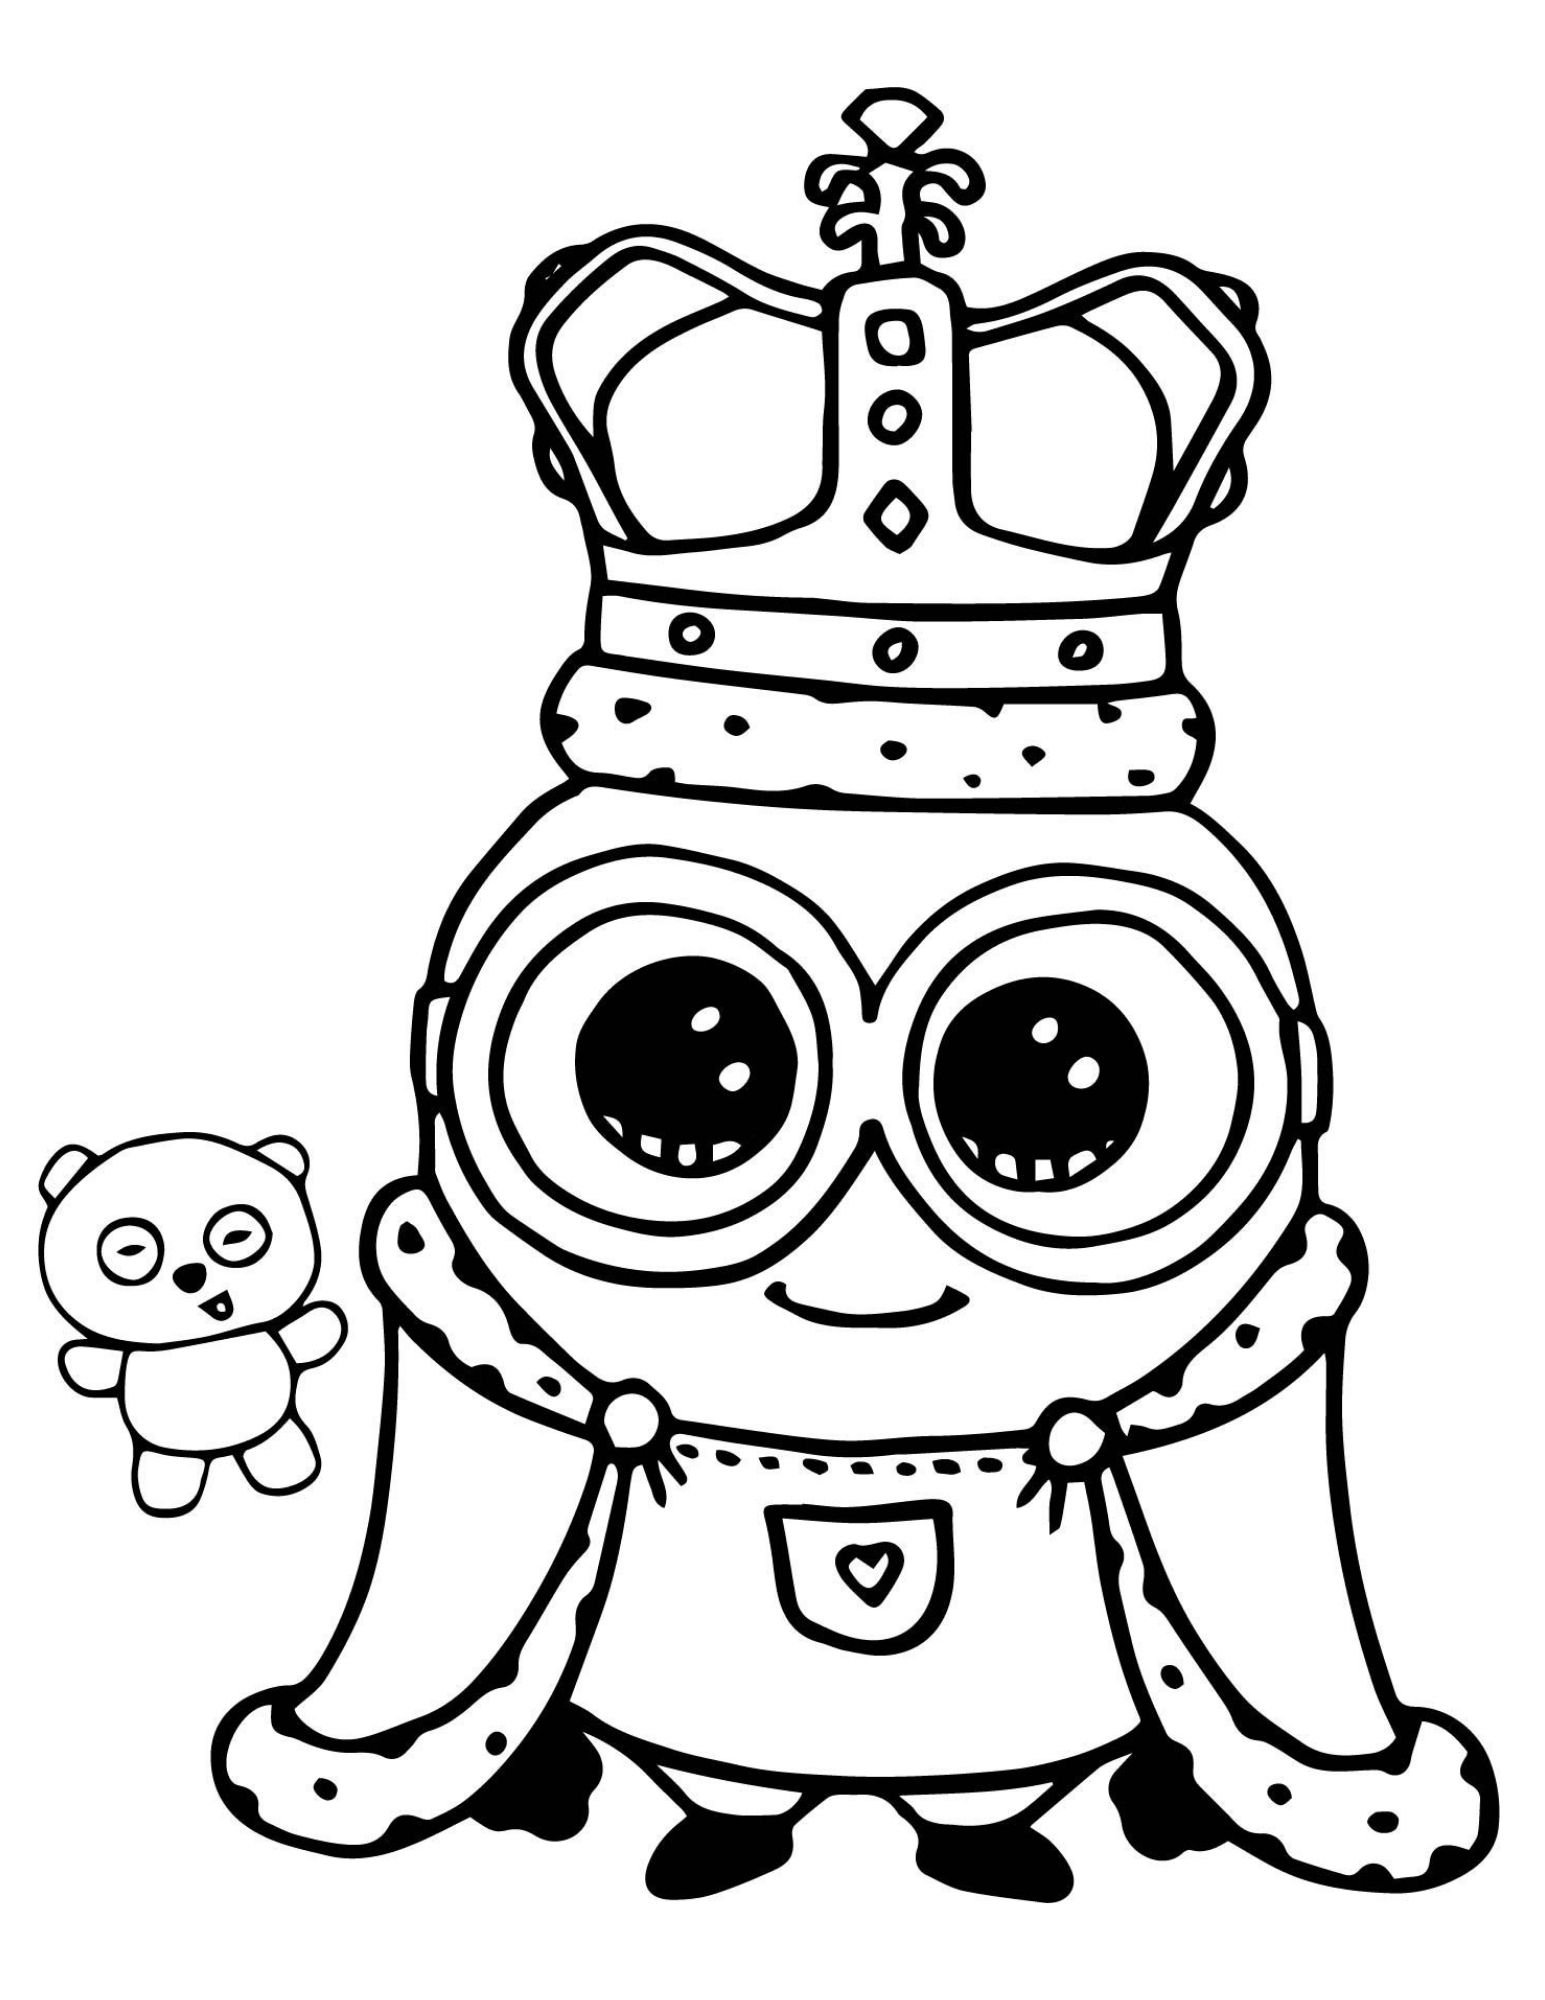 Pieces of minions coloring pages coloring pages for children activities for children